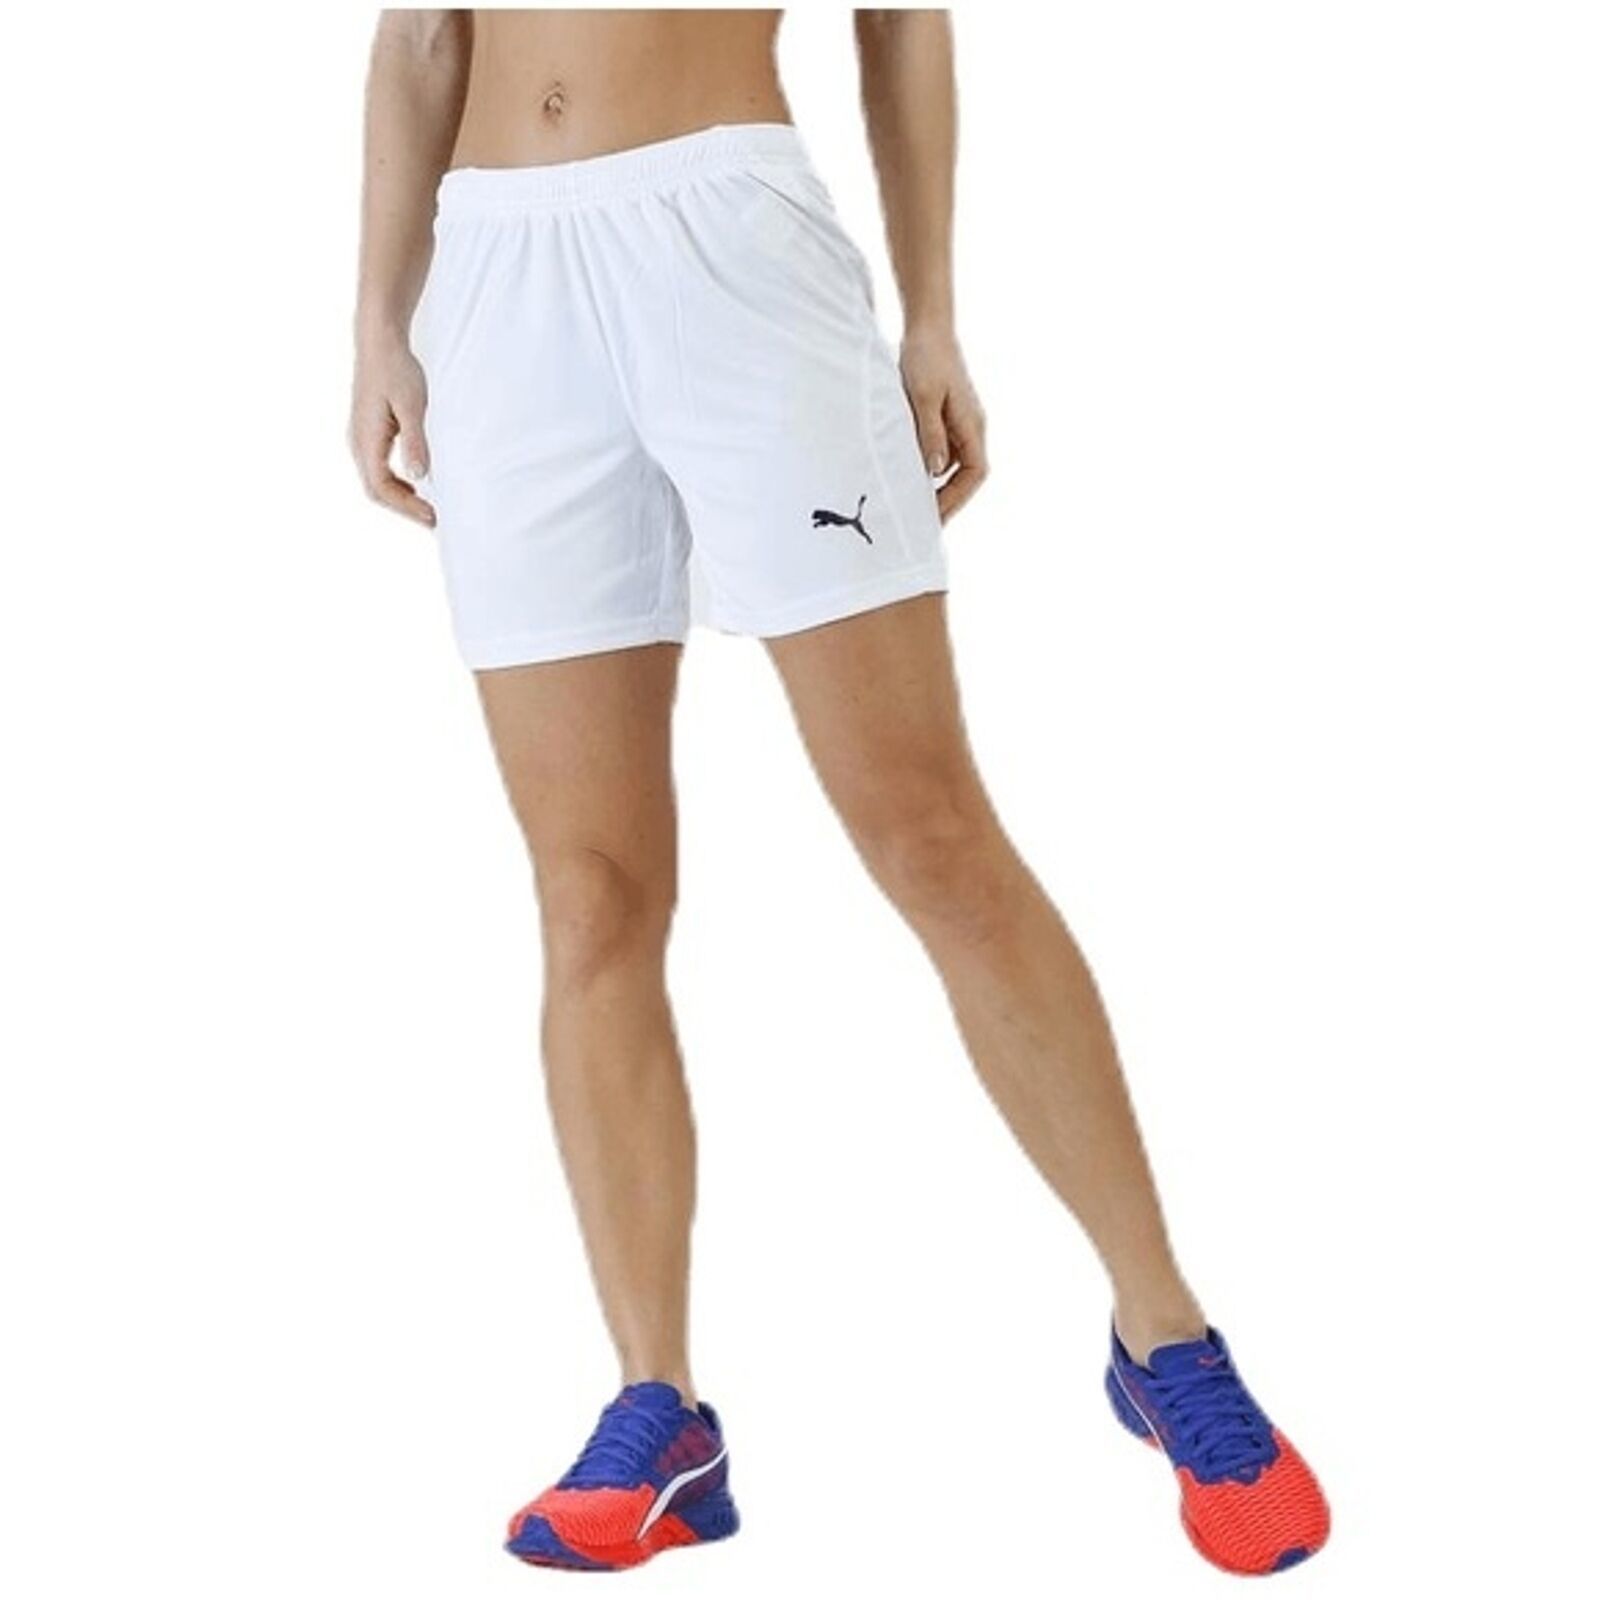 Primary image for PUMA White Shorts Women’s Large Elastic Waist Drawcord DryCell Athletic Sport